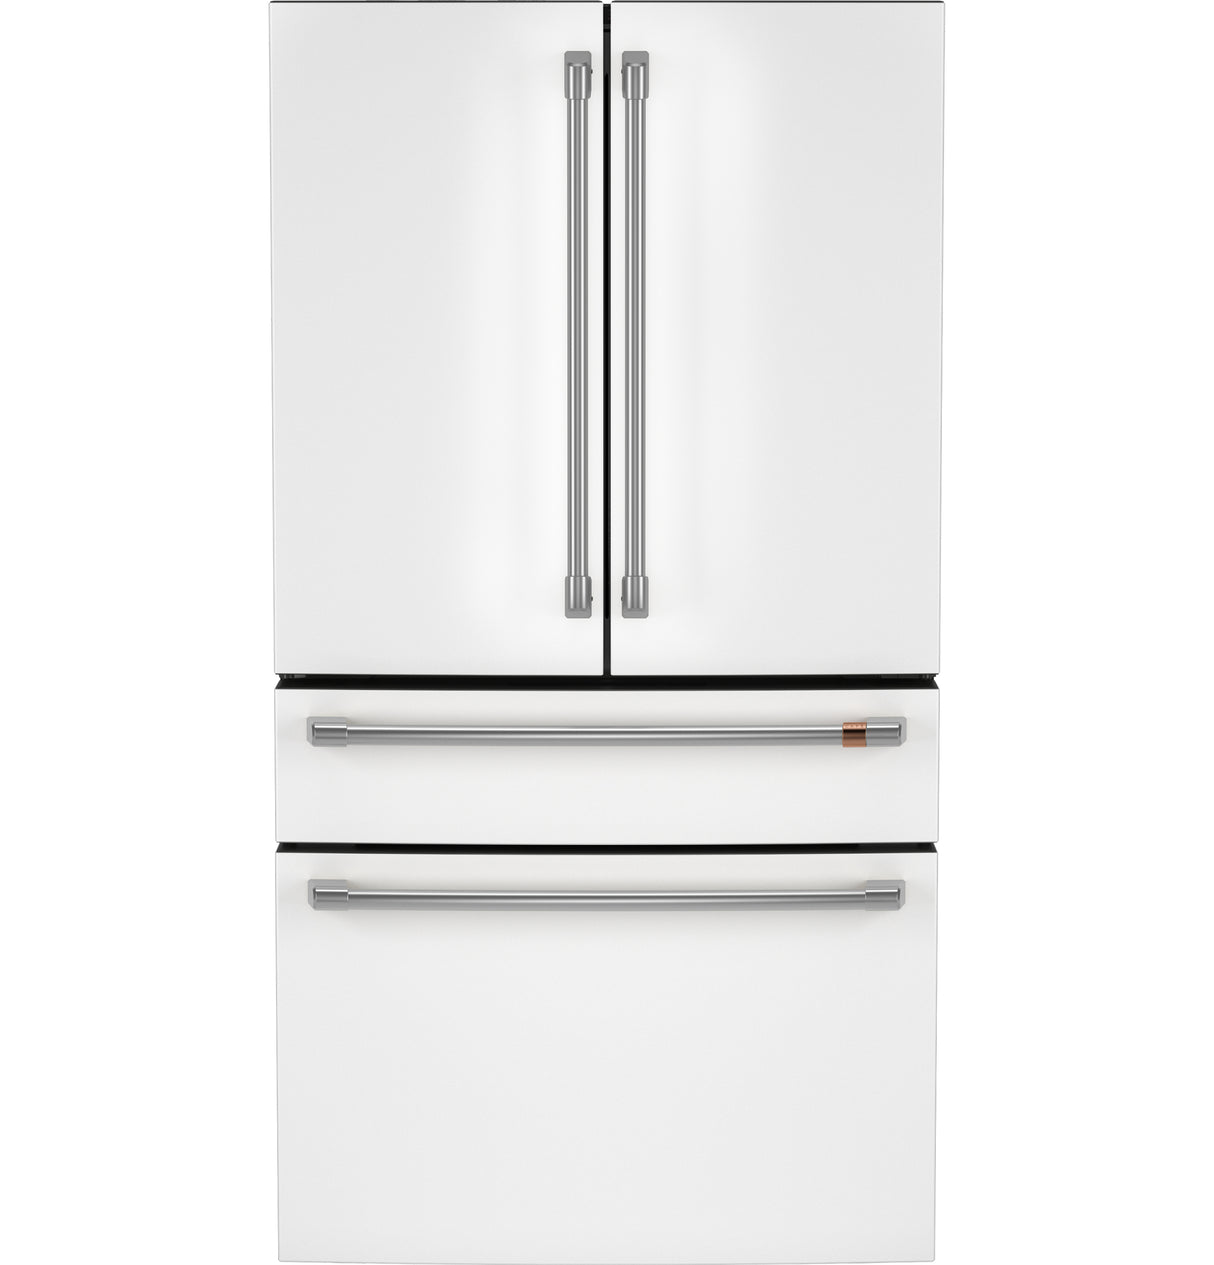 Caf(eback)(TM) ENERGY STAR(R) 28.7 Cu. Ft. Smart 4-Door French-Door Refrigerator With Dual-Dispense AutoFill Pitcher - (CGE29DP4TW2)